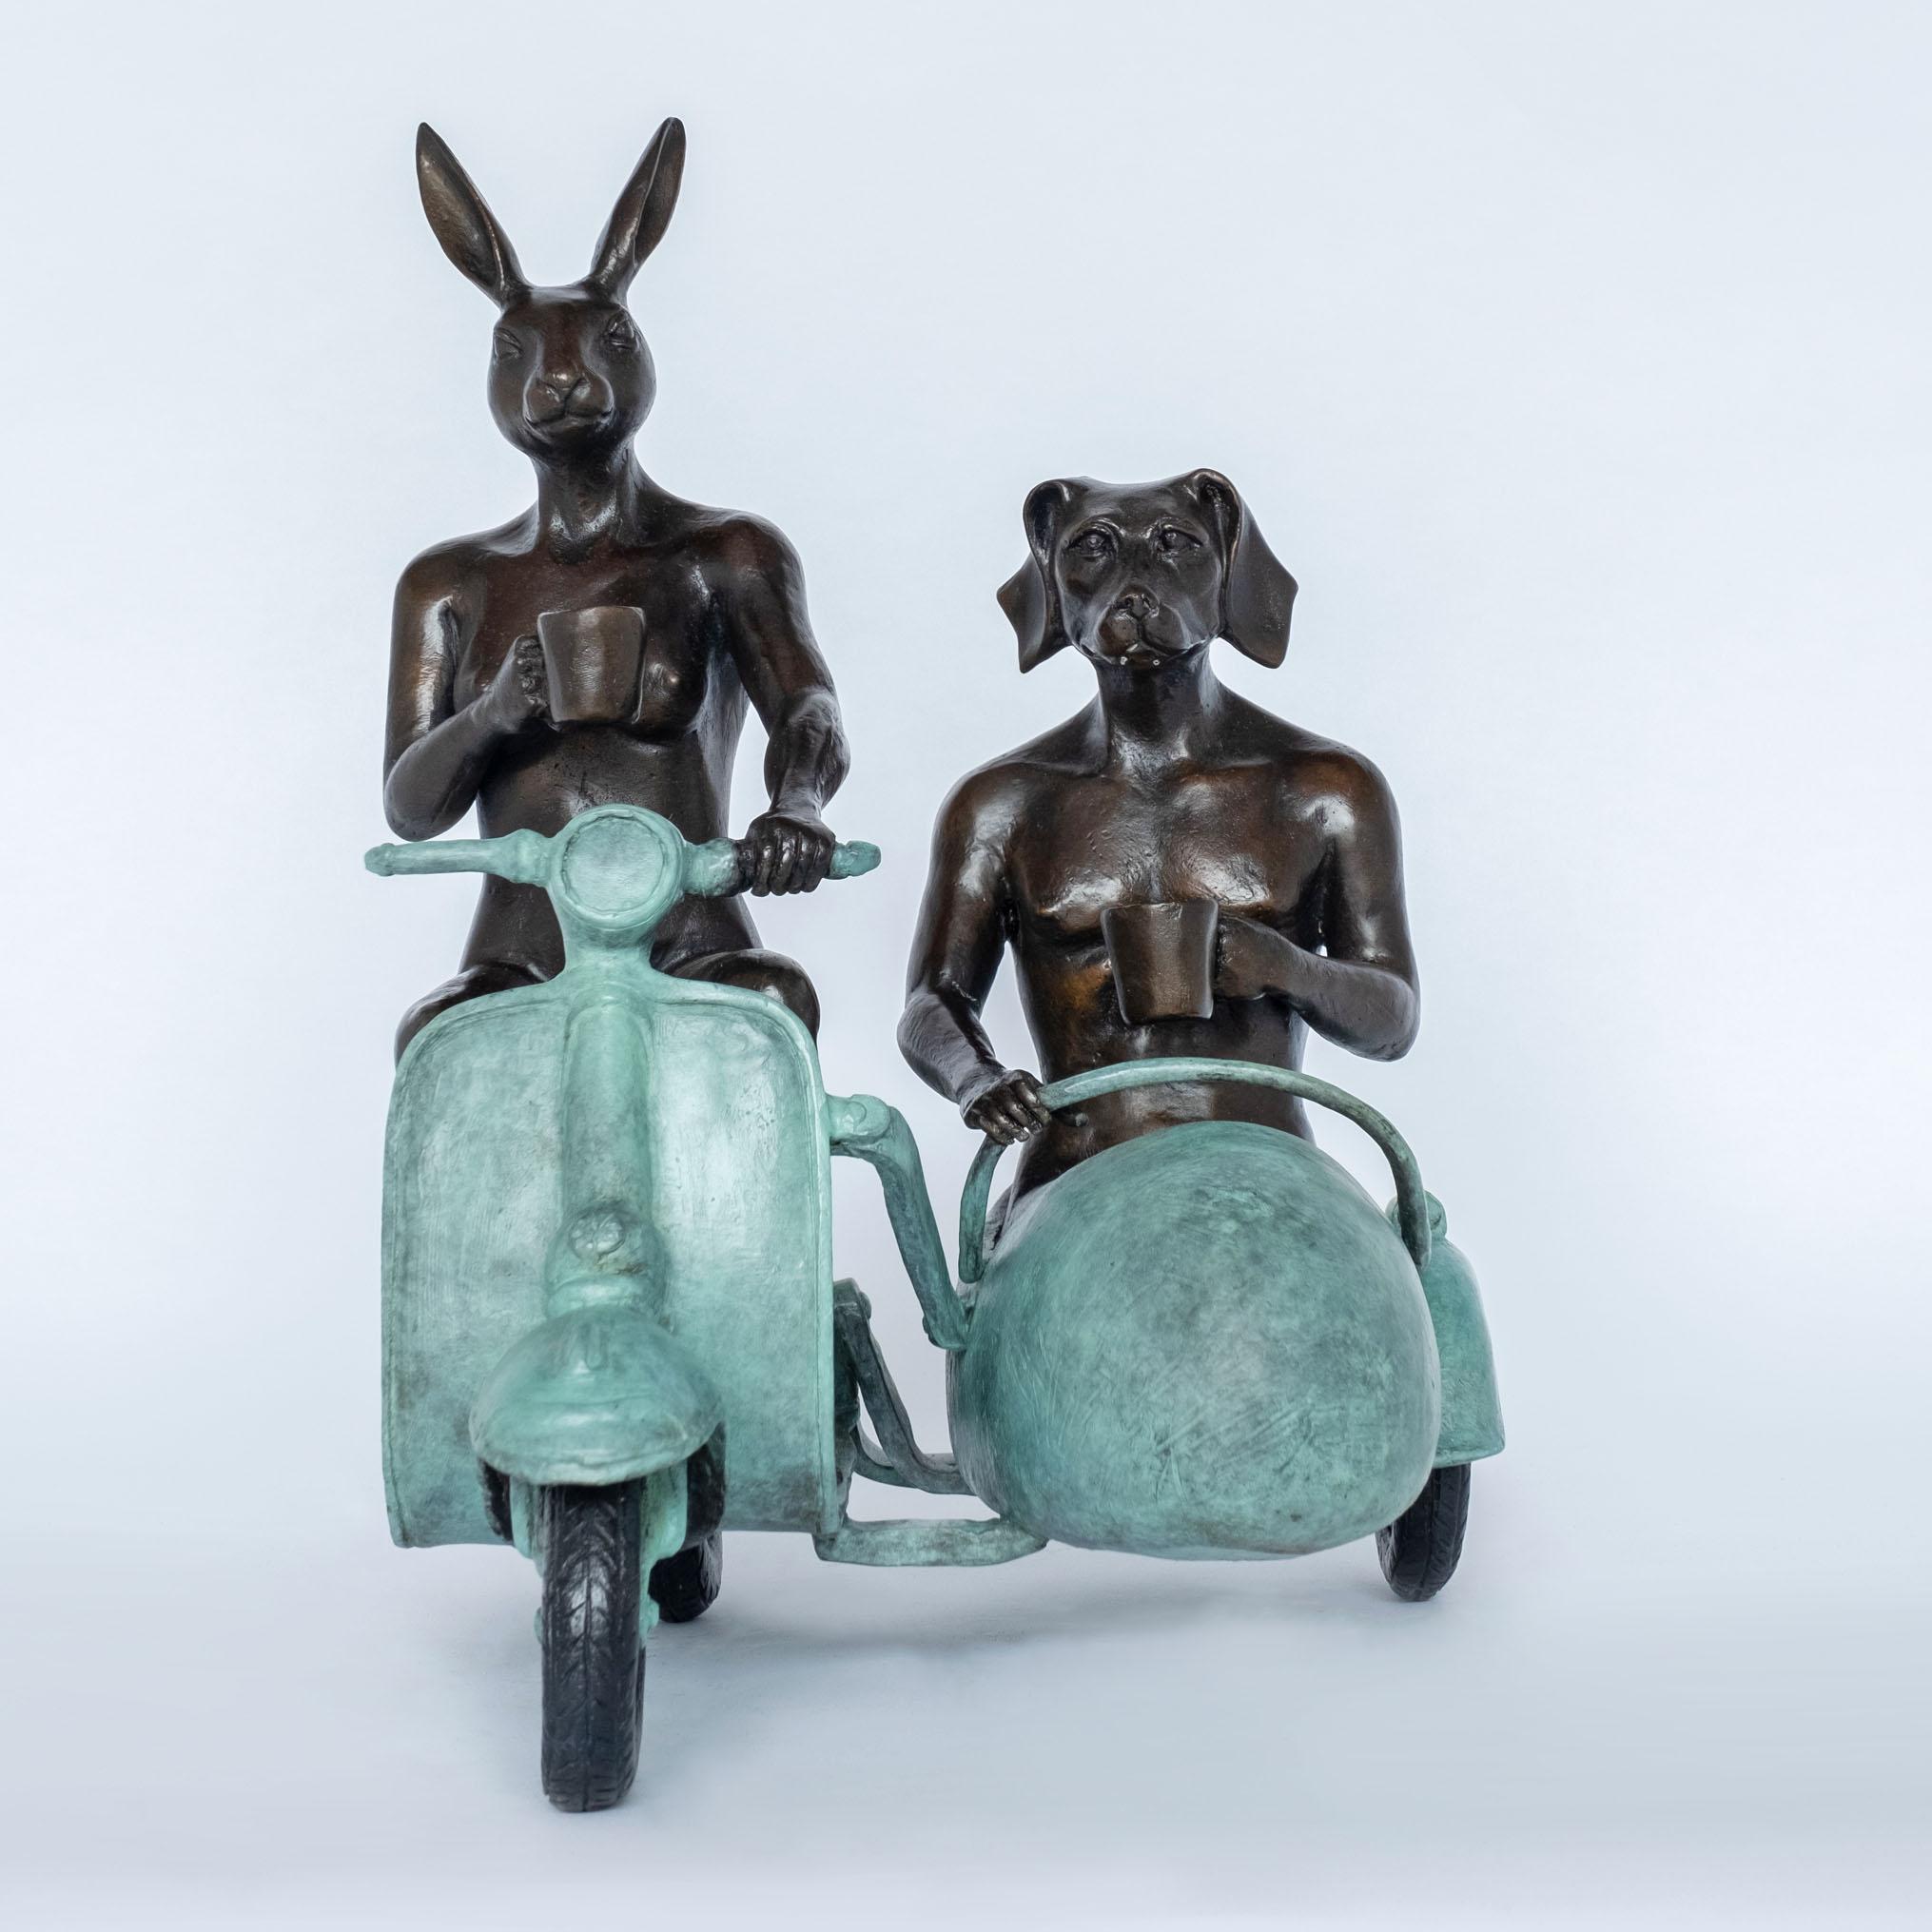 'They were always side by side' by Gillie & Marc, bronze sculpture, patina - Gold Figurative Sculpture by Gillie and Marc Schattner